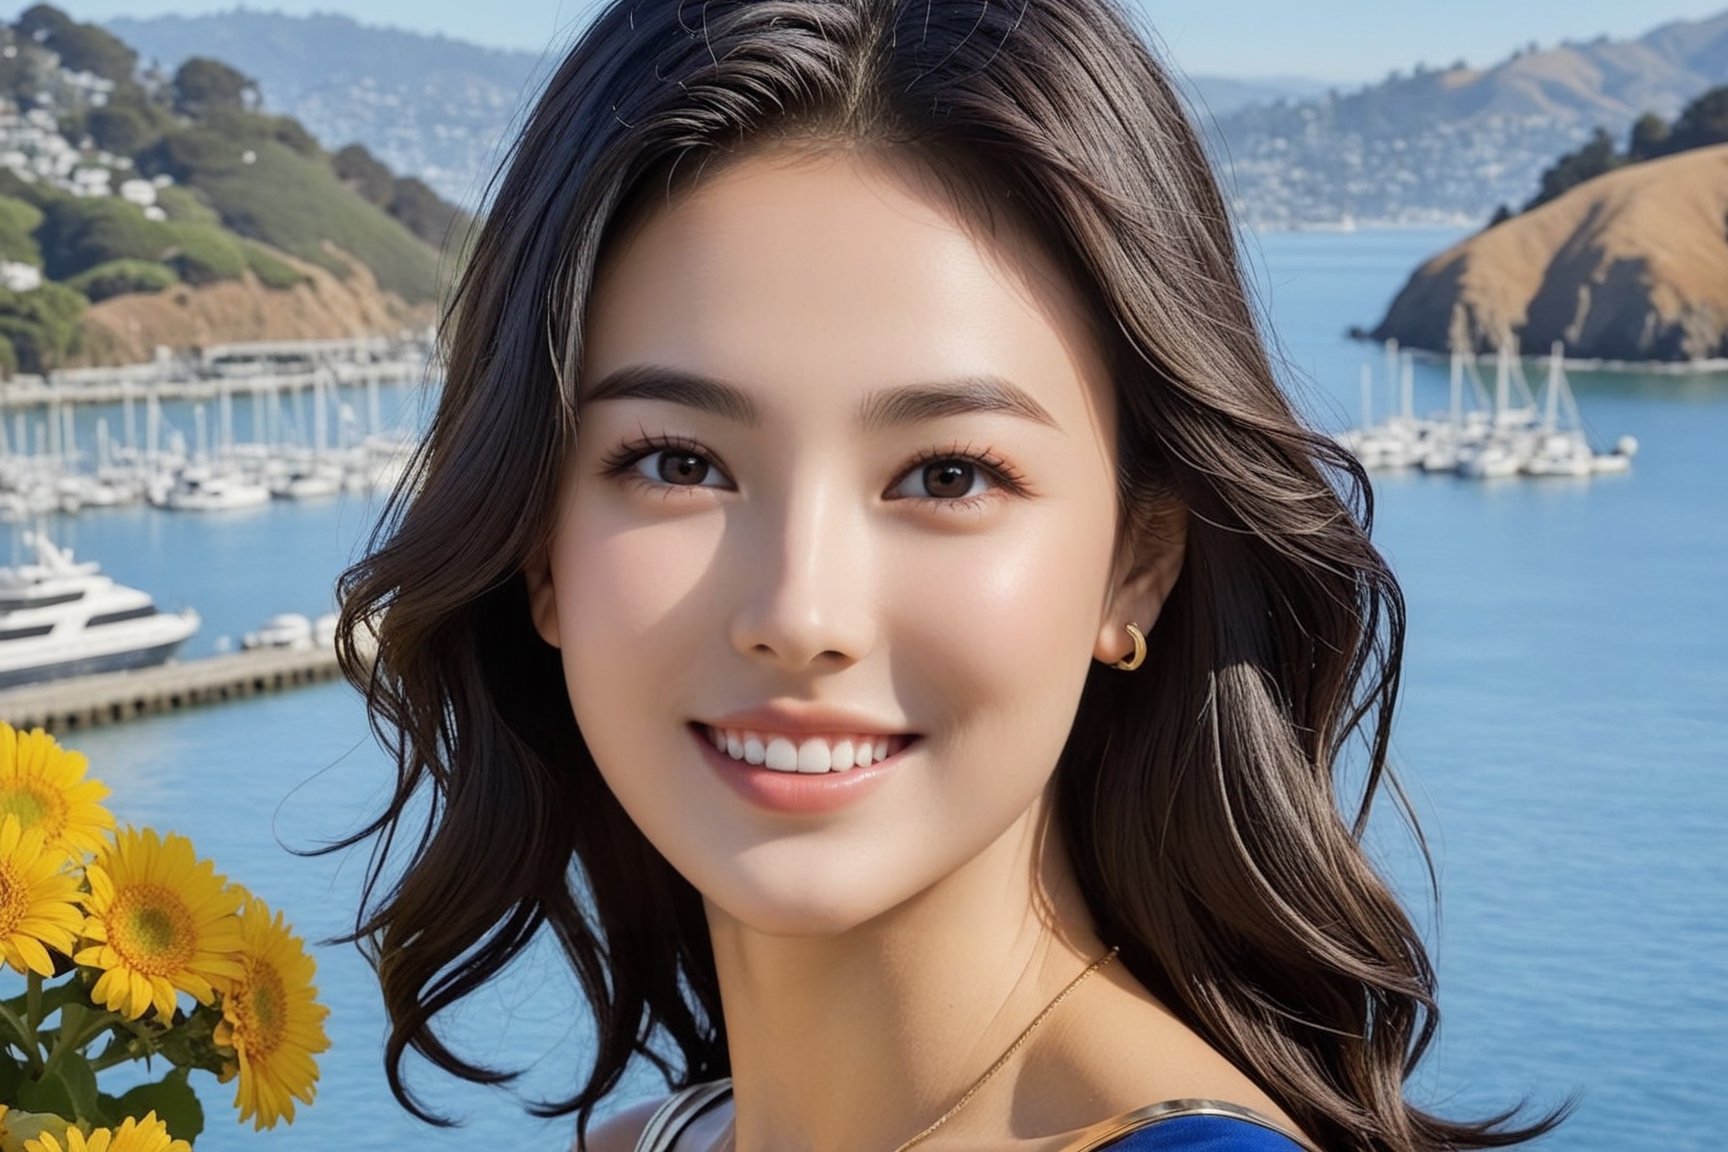 Hyper-Realistic photo of a girl,20yo,1girl,perfect female form,perfect body proportion,perfect anatomy,detailed exquisite face,soft shiny skin,smile,mesmerizing,short hair,small earrings,necklaces
BREAK
backdrop of a beautiful Sausalito in California,harbor,boat,ocean,bridge,(fullbody:1.2),(distant view:1.2),(heels:1.2)
BREAK
(rule of thirds:1.3),perfect composition,studio photo,trending on artstation,(Masterpiece,Best quality,32k,UHD:1.5),(sharp focus,high contrast,HDR,hyper-detailed,intricate details,ultra-realistic,award-winning photo,ultra-clear,kodachrome 800:1.3),(chiaroscuro lighting,soft rim lighting:1.2),by Karol Bak,Antonio Lopez,Gustav Klimt and Hayao Miyazaki,photo_b00ster,real_booster,ani_booster,wonder-woman-xl,song-hyegyo-xl